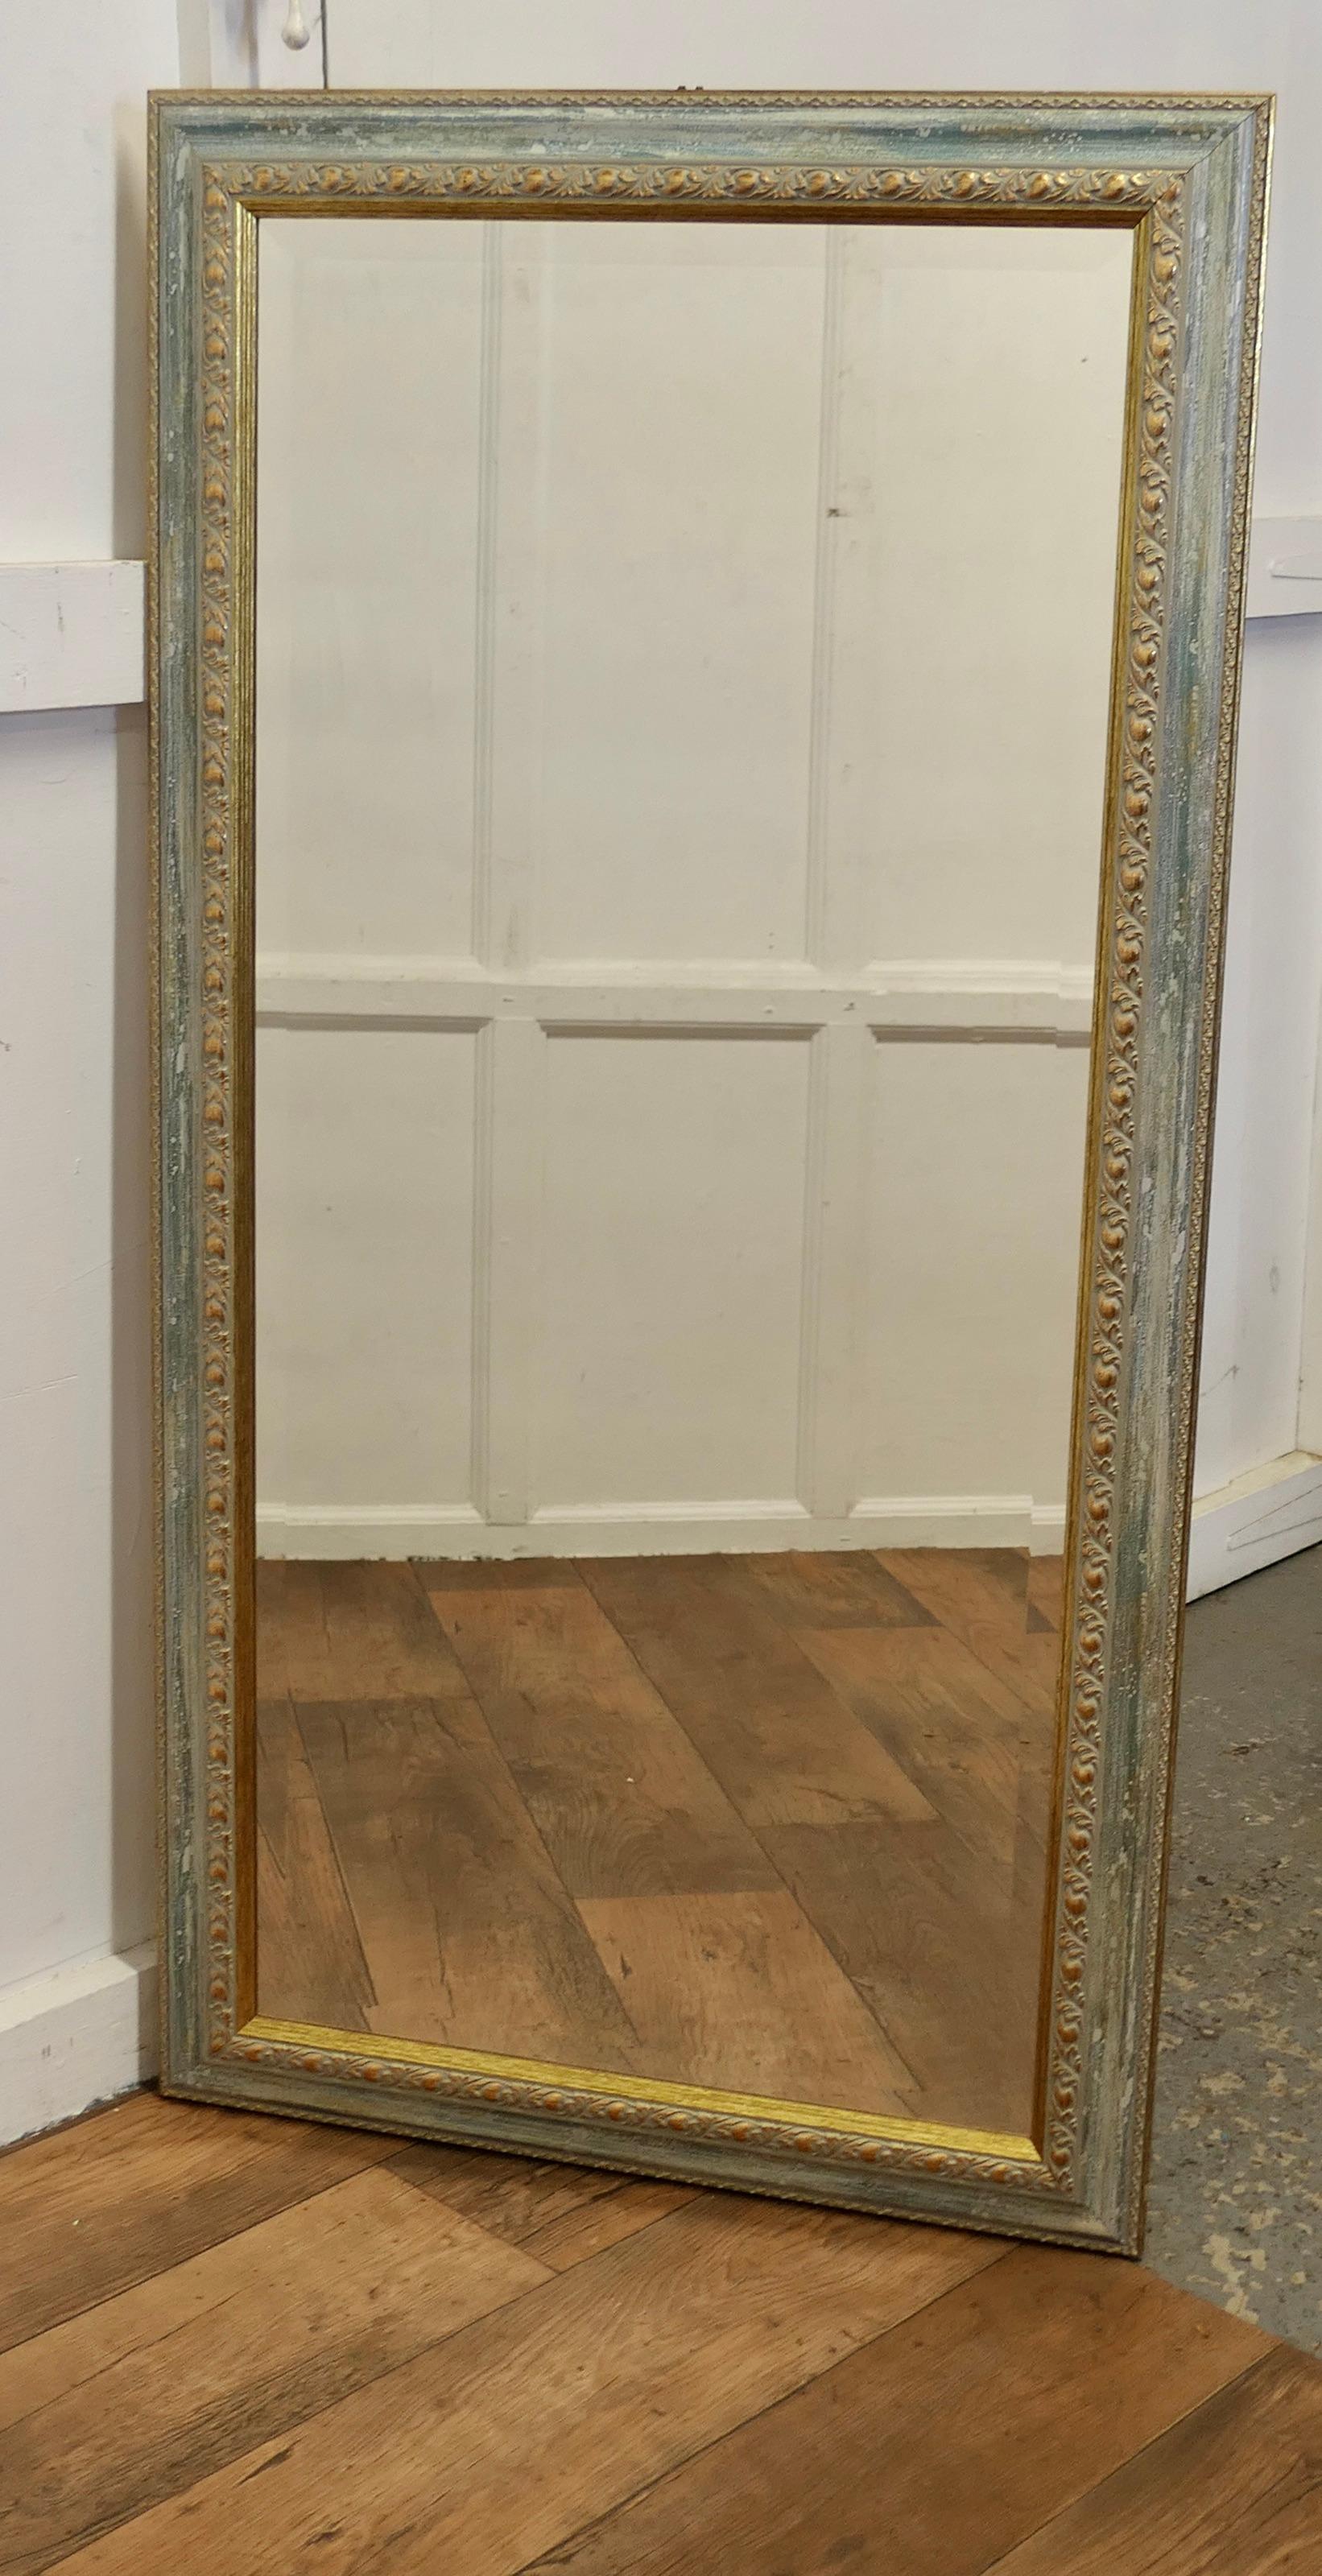 A Decorative Long Gilt and Pale Blue Dressing Mirror

A delightful piece, the mirror has a 4” wide pale Blue and Gilt decoratively moulded frame, the looking glass is in bevelled and in good condition
A very good decorative piece, the mirror can